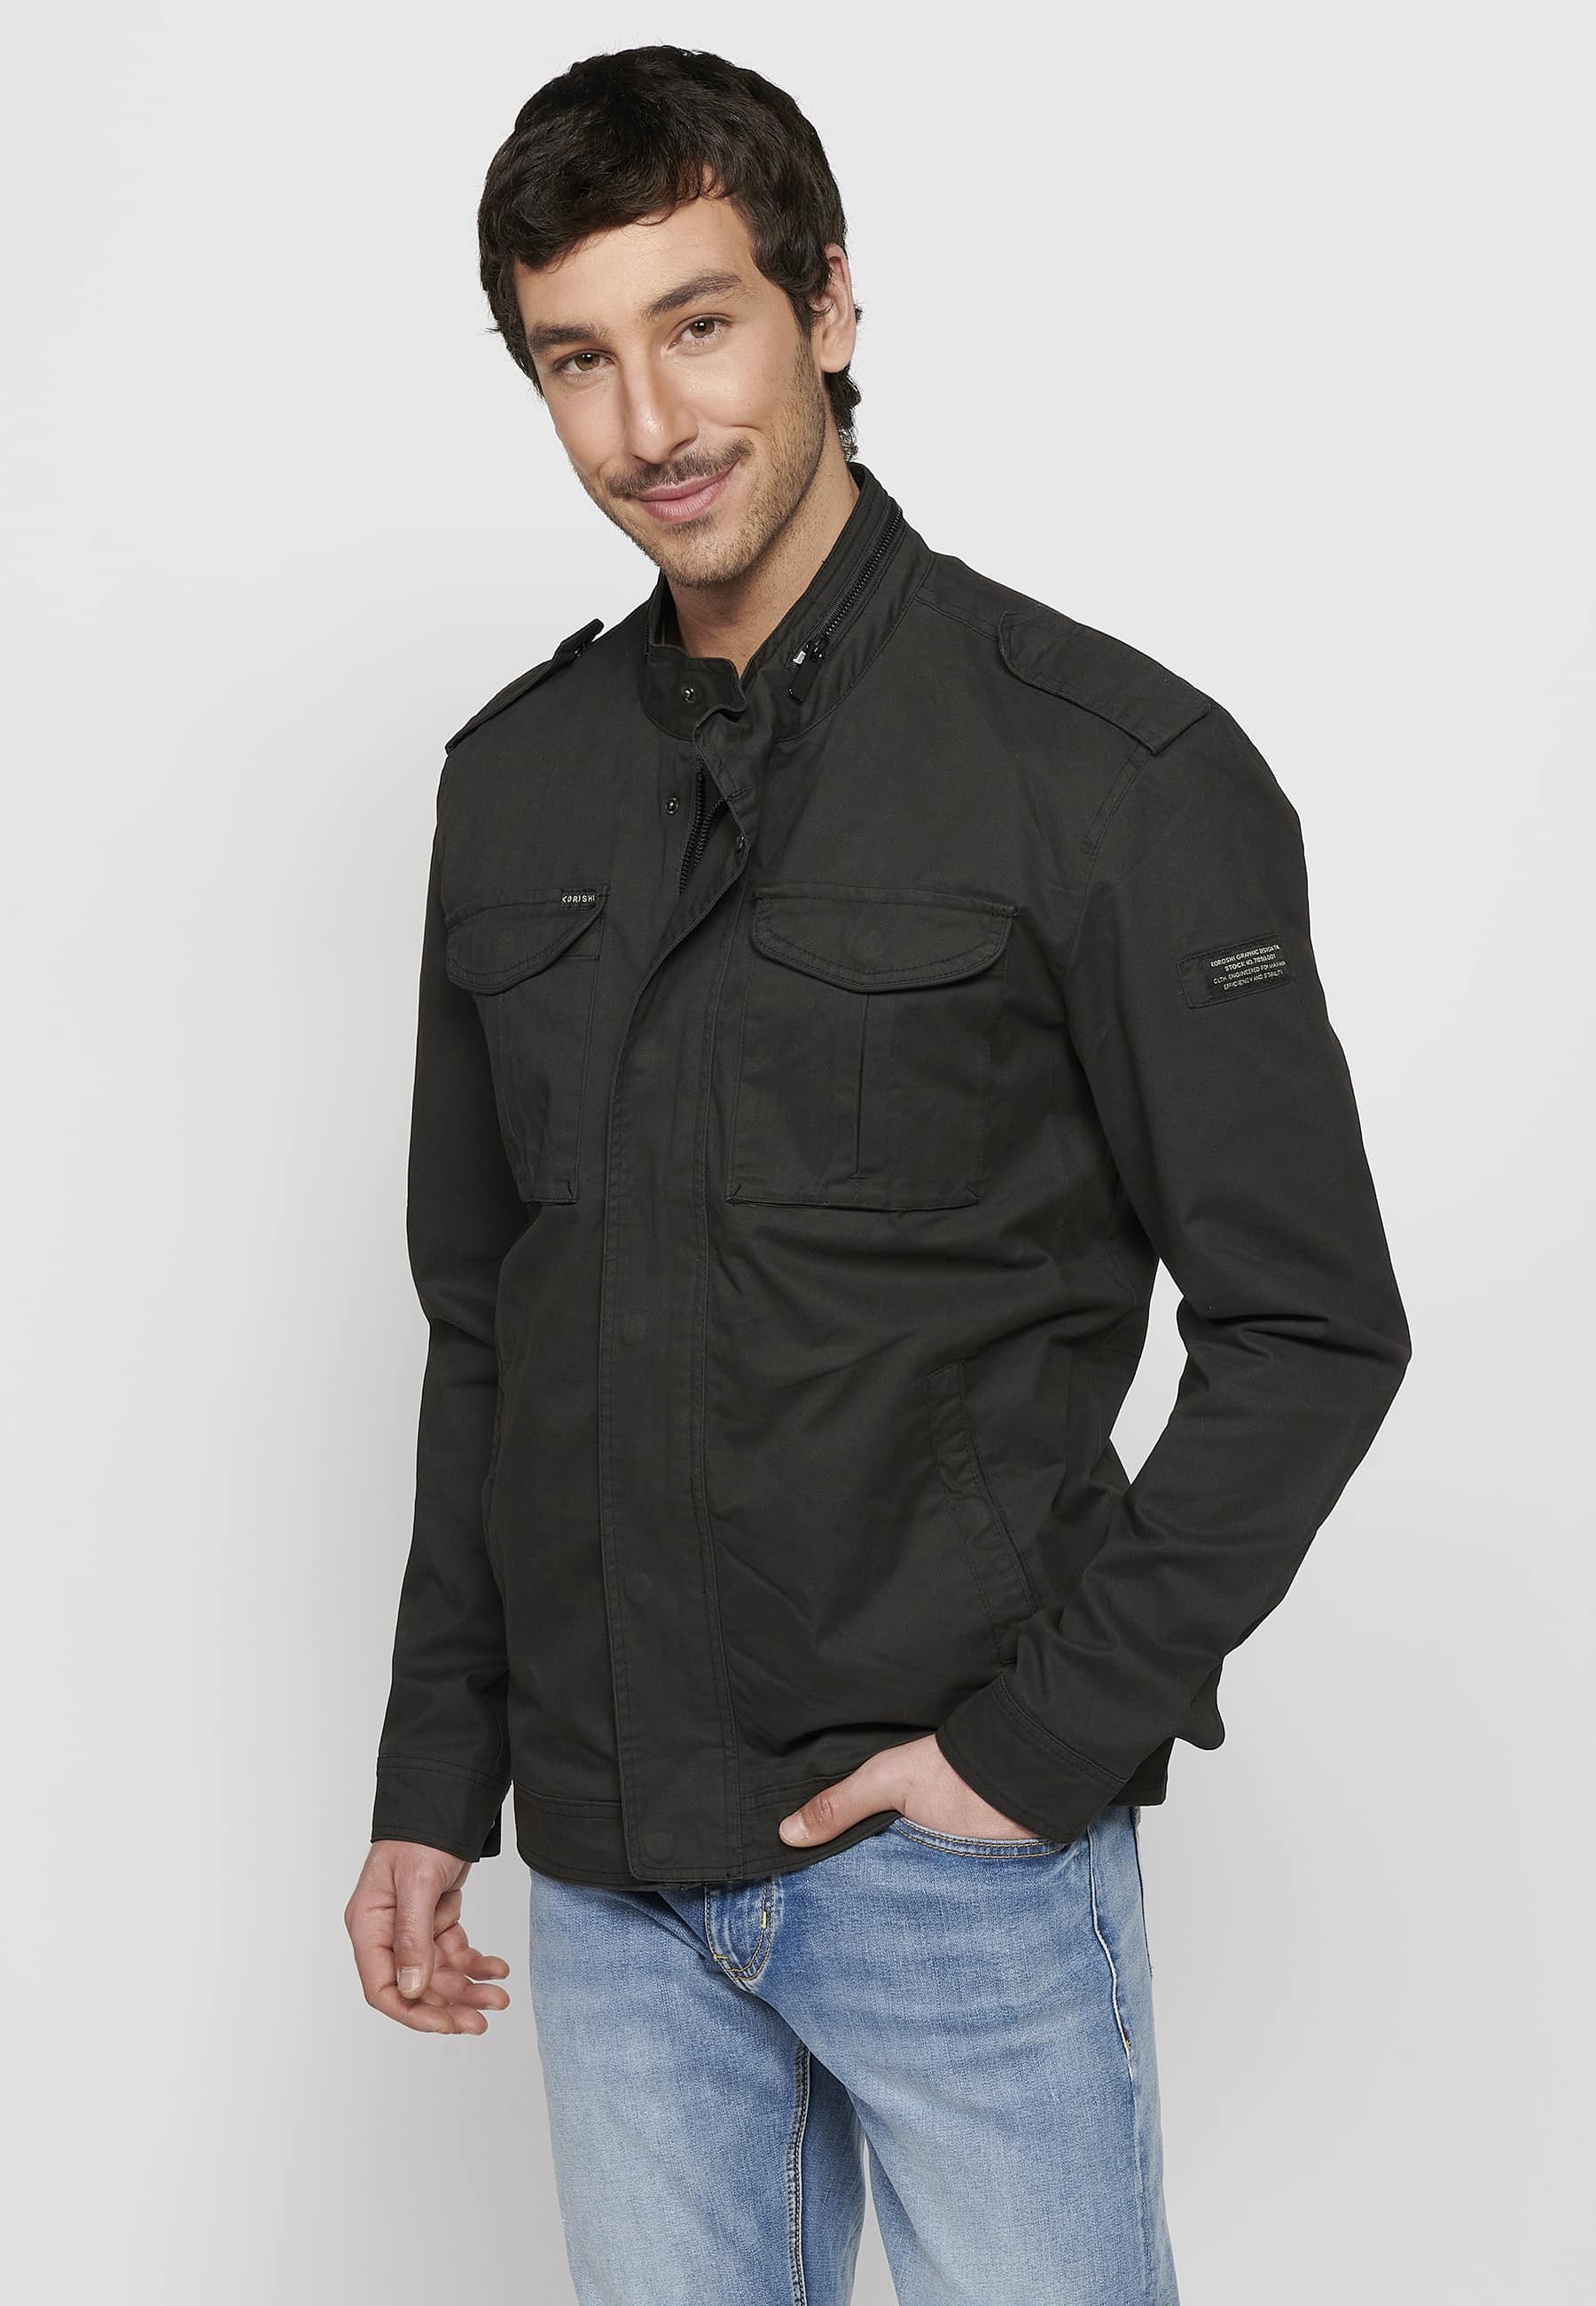 Long-sleeved jacket with high collar and front zipper closure with pockets in black for men. 3